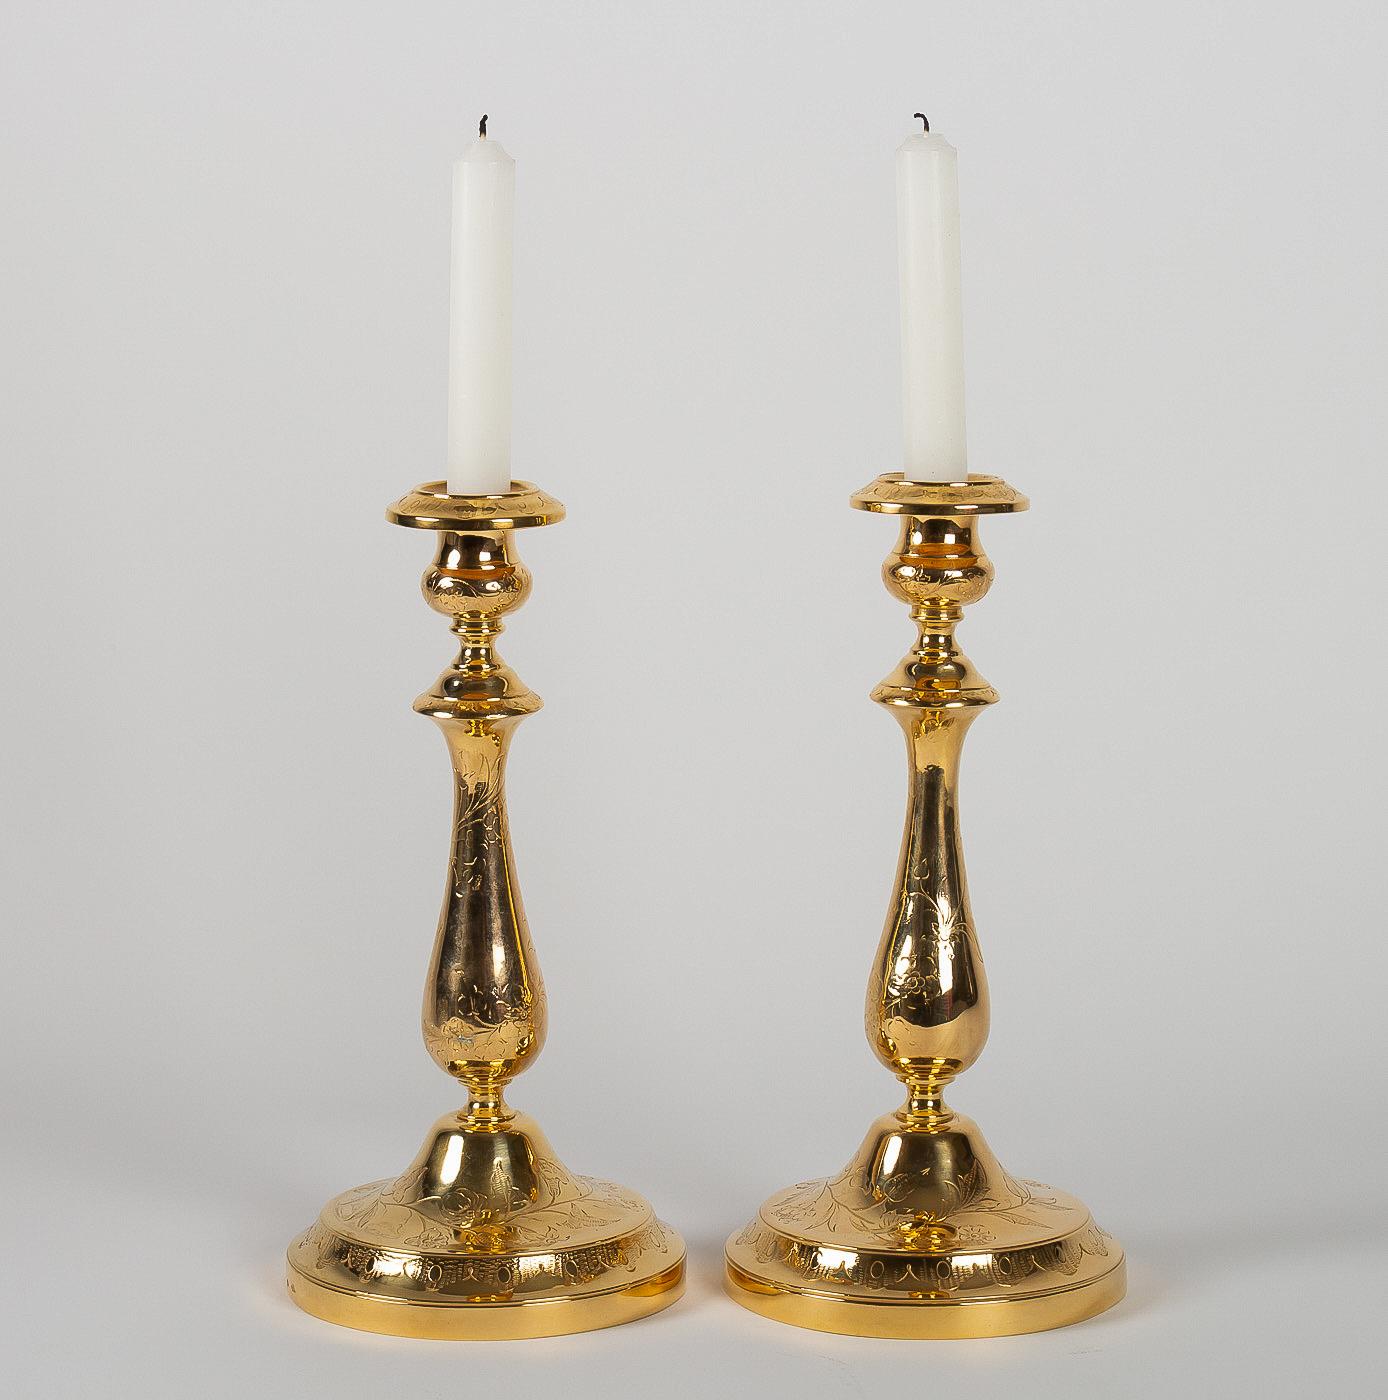 Maison Christofle, 19th-Century Pair of Silvered and Gilted Metal Candlesticks For Sale 7